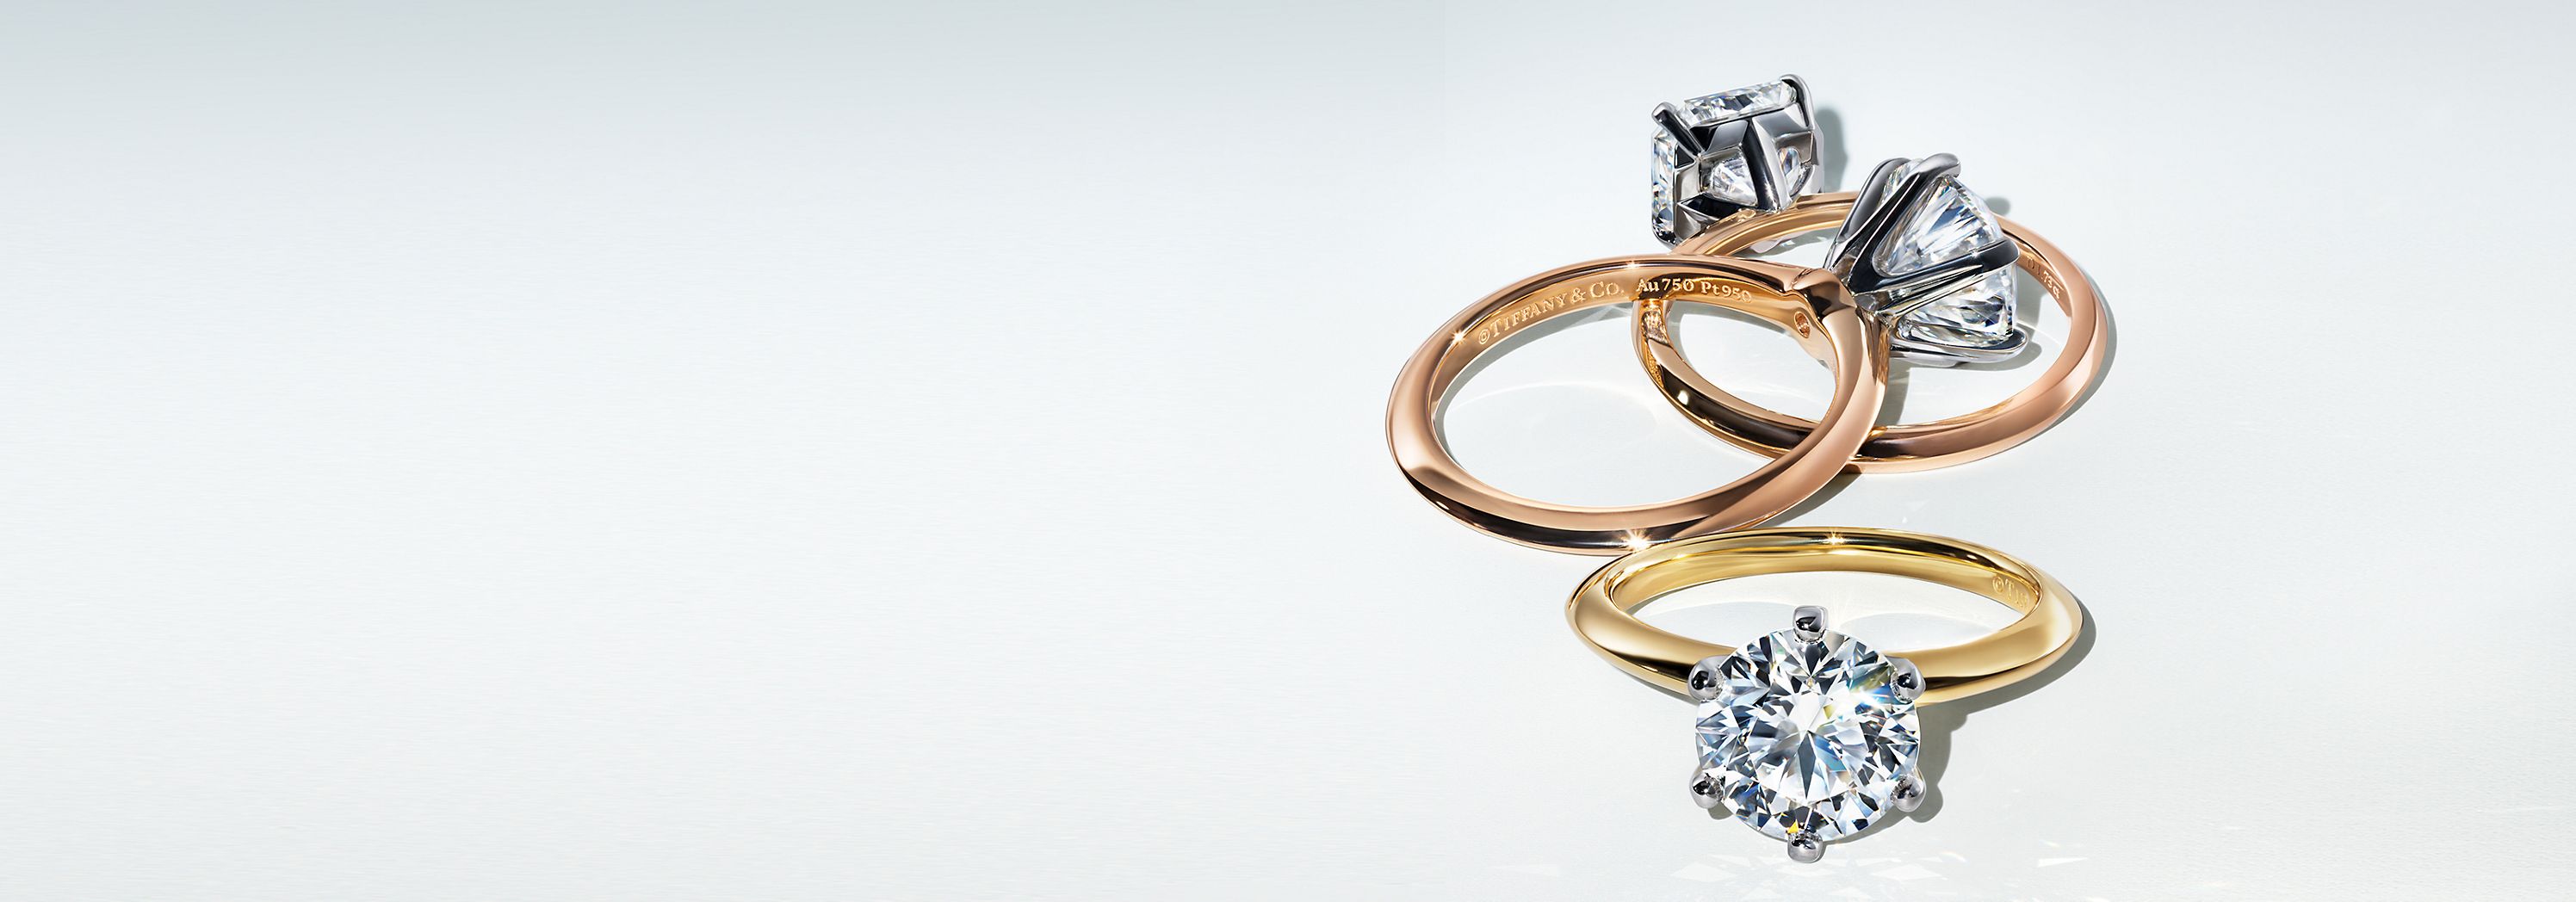 Engagement Ring Styles & Settings